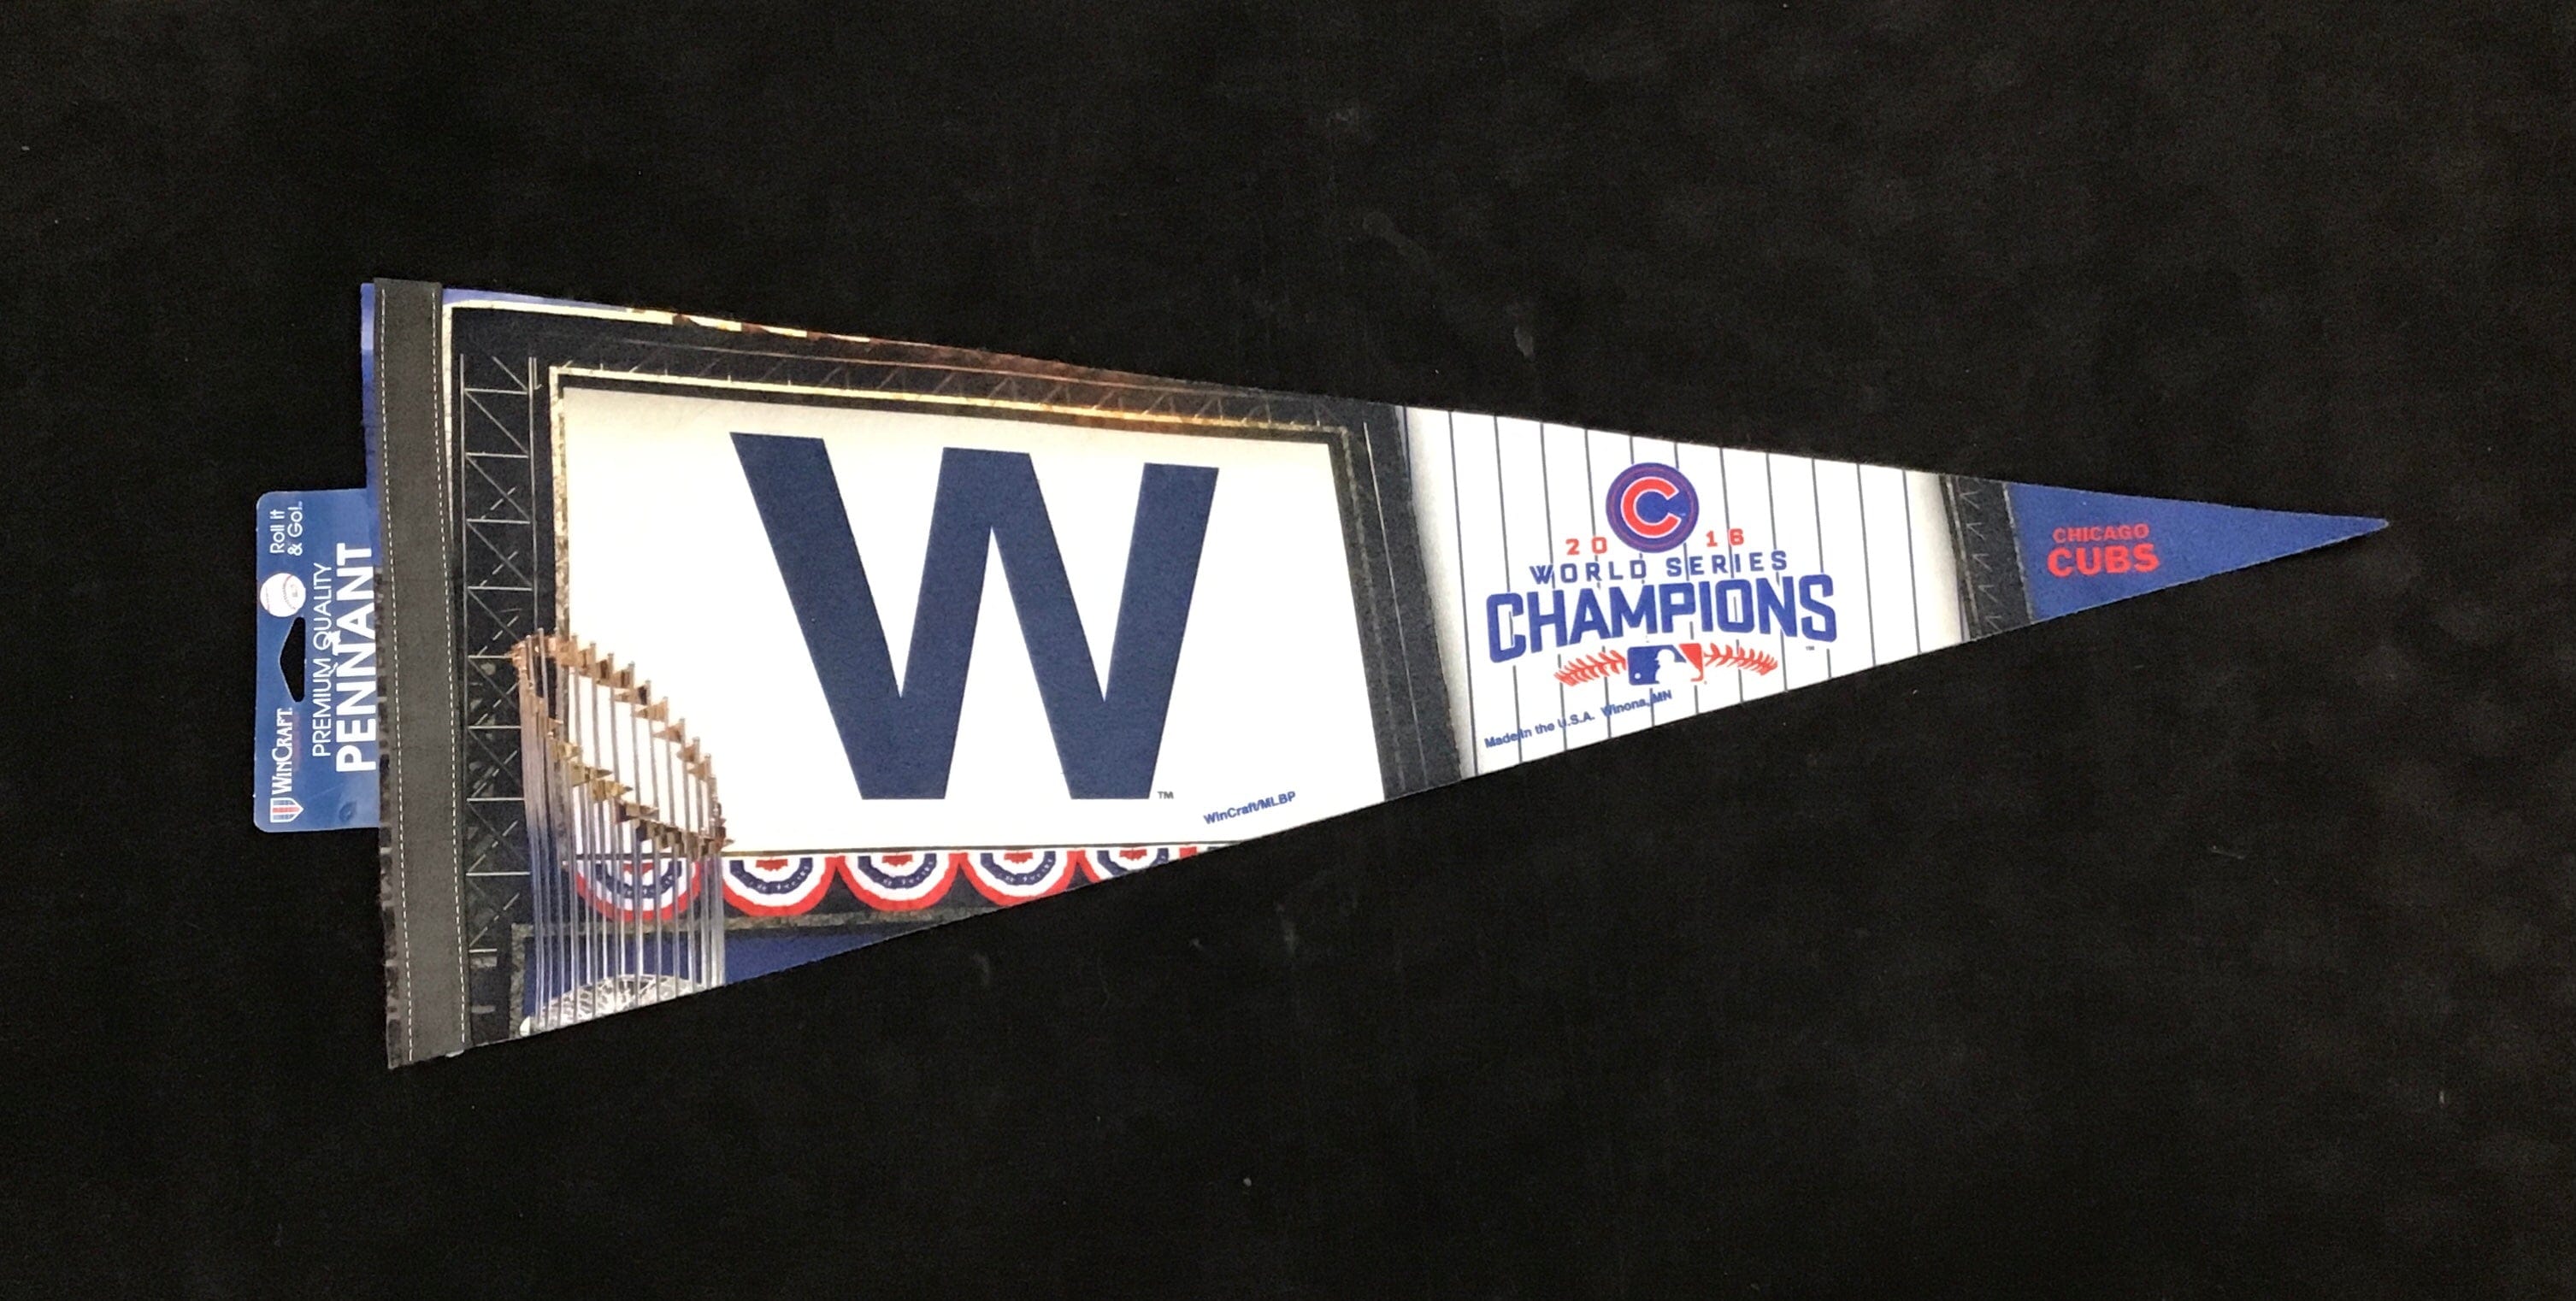 Chicago Cubs 2016 World Series Champions Pennant